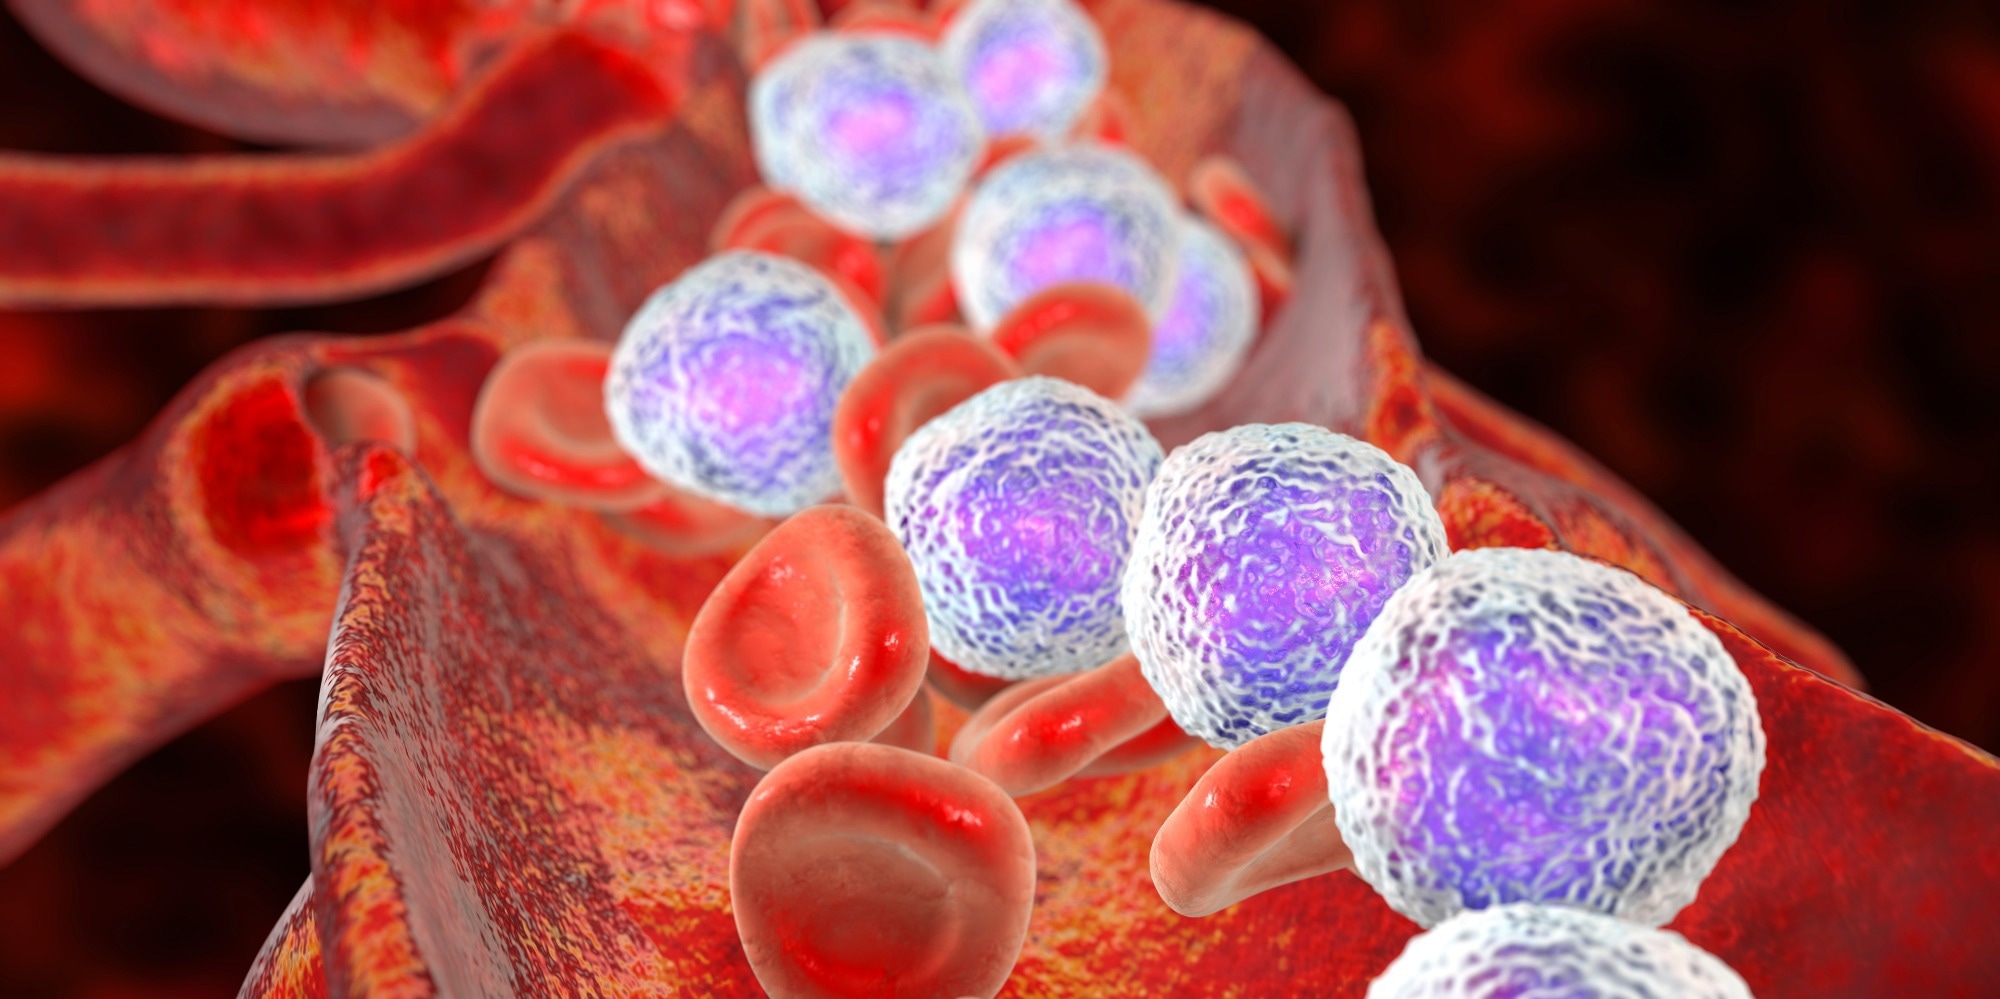 Study: Microbiota, Diet and Acute Leukemia: Tips and Tricks on their Possible Connections. Image Credit: Kateryna Kon / Shutterstock.com